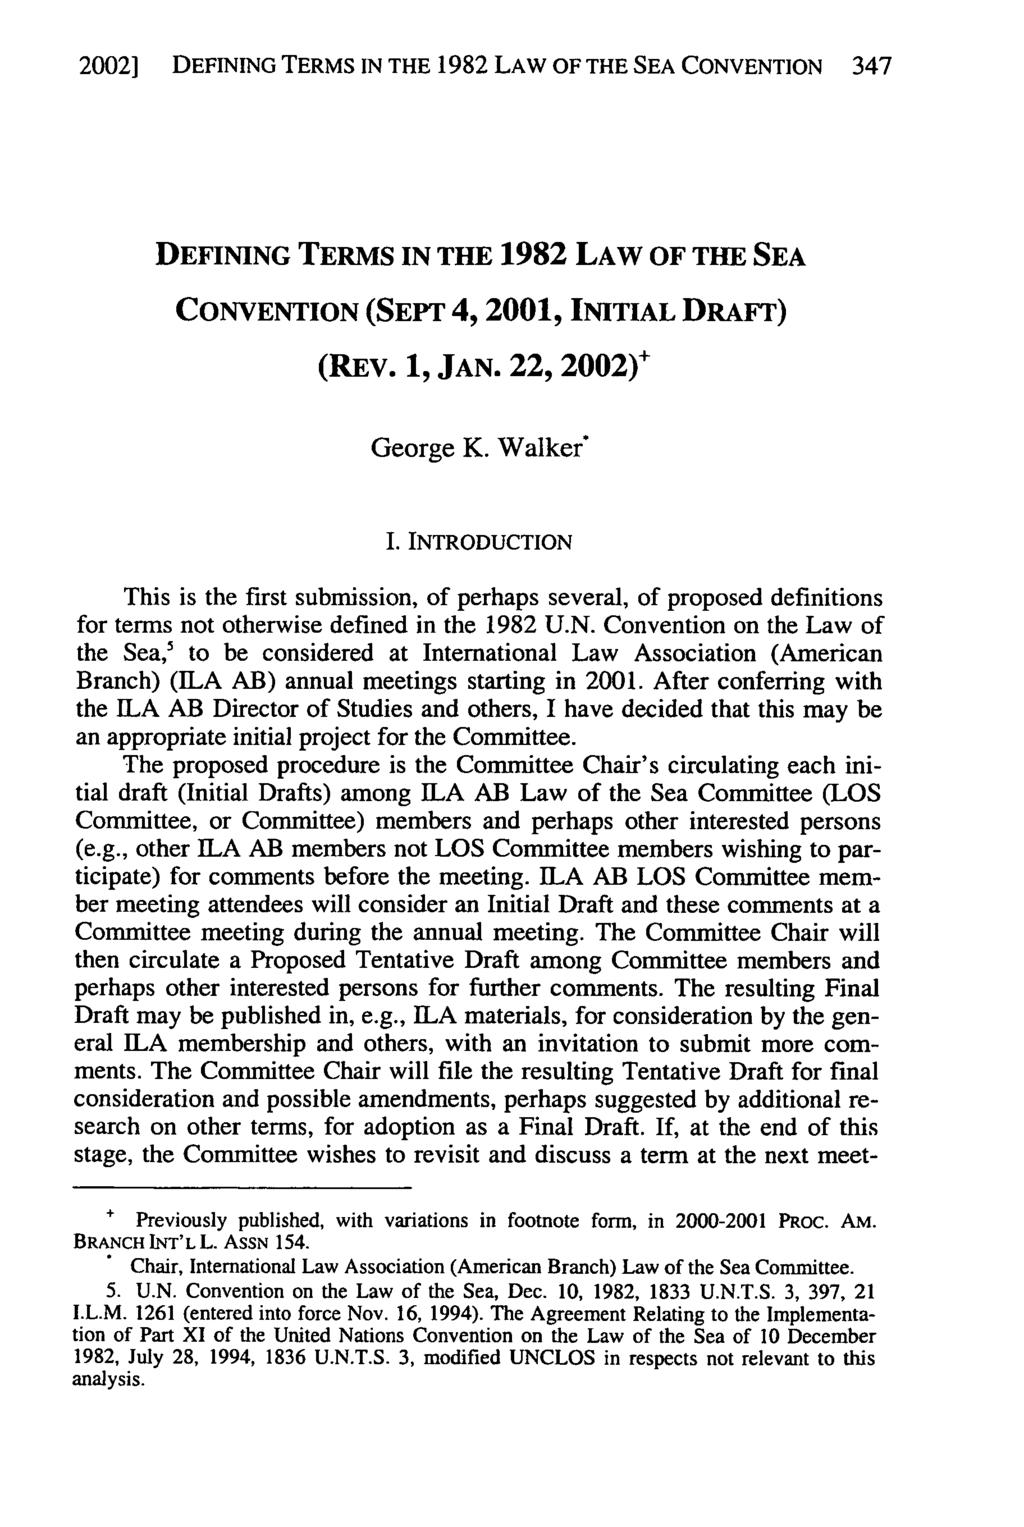 2002] DEFINING Walker TERMS and Noyes: IN Definitions THE 1982 for LAW the 1982 OF Law THE of the SEA Sea CONVENTION Convention 347 DEFINING TERMS IN THE 1982 LAW OF THE SEA CONVENTION (SEPT 4, 2001,